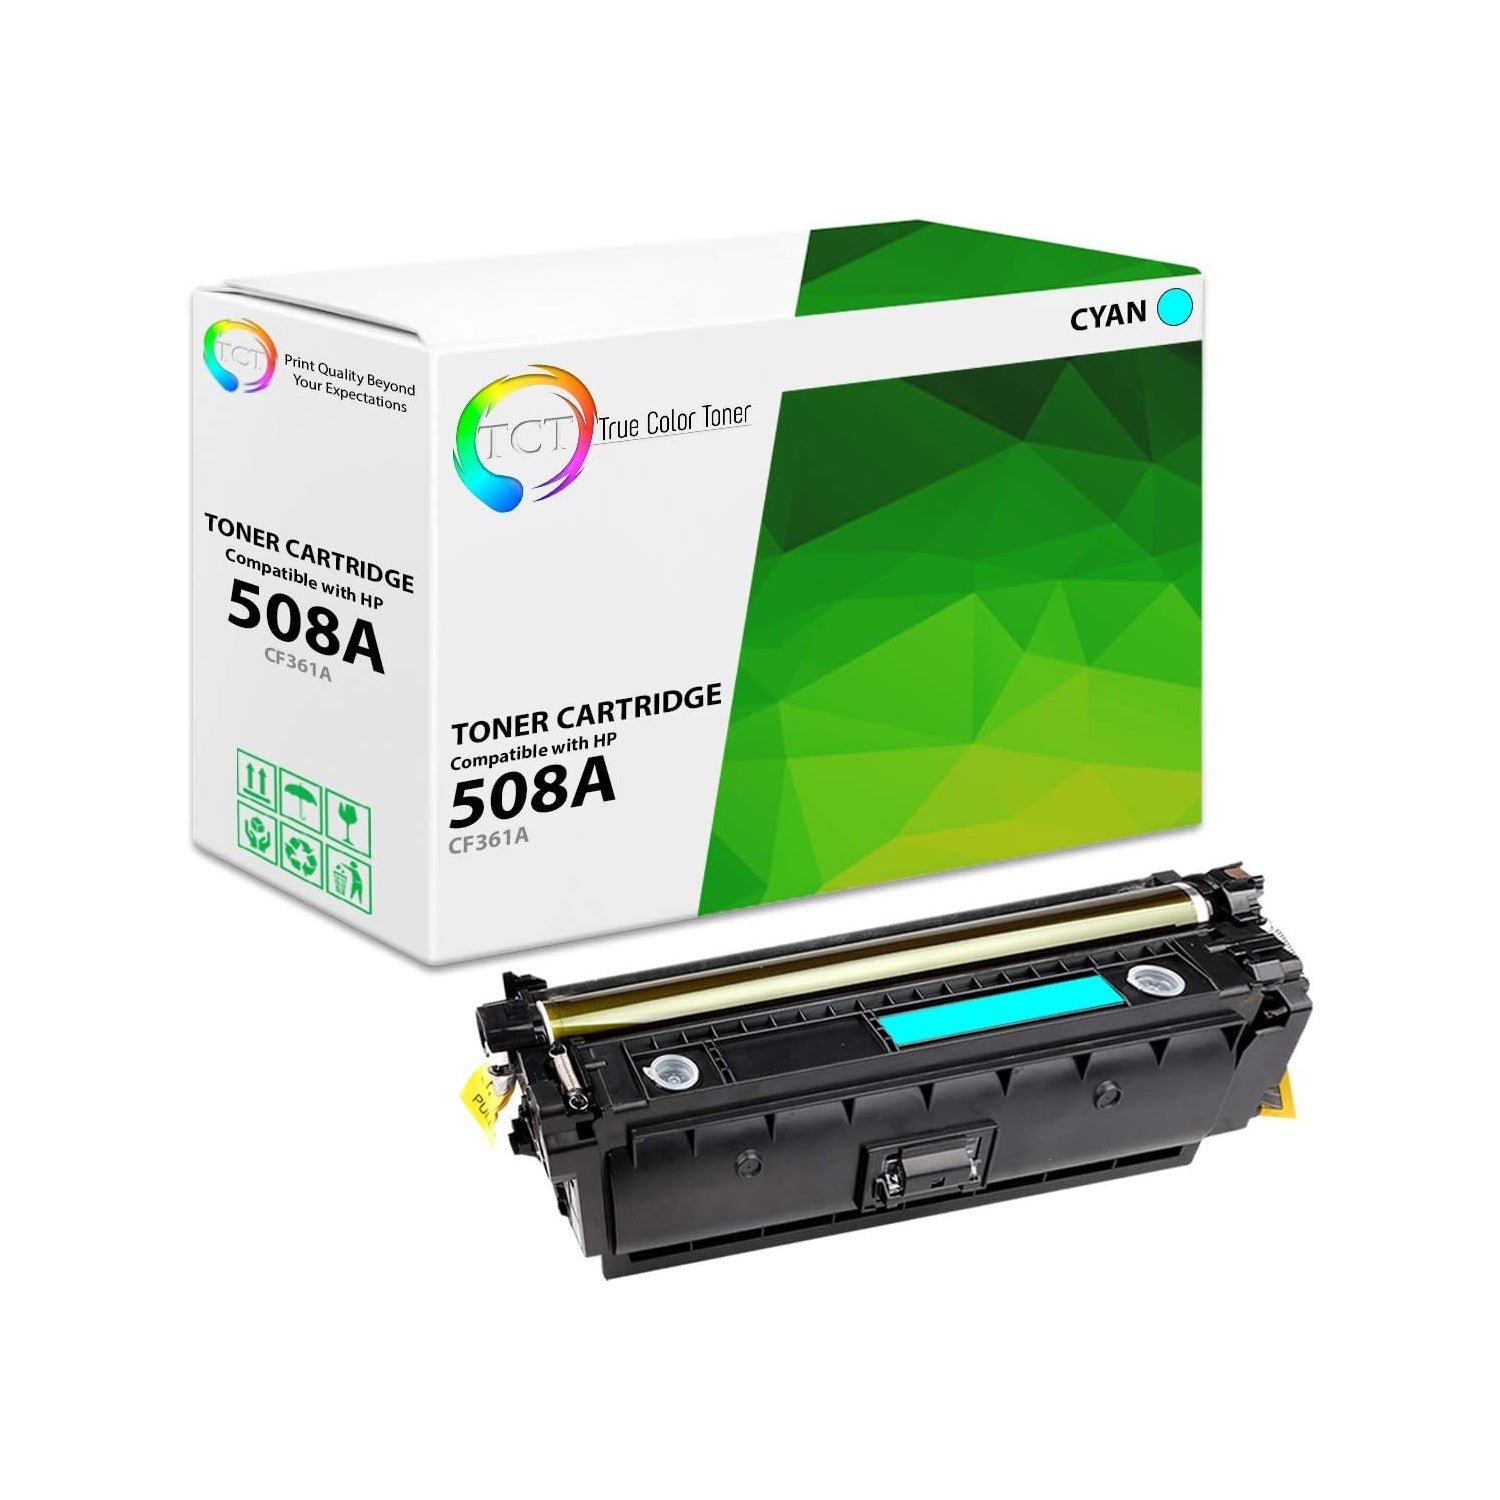 TCT Compatible Toner Cartridge Replacement for the HP 508A Series - 1 Pack Cyan